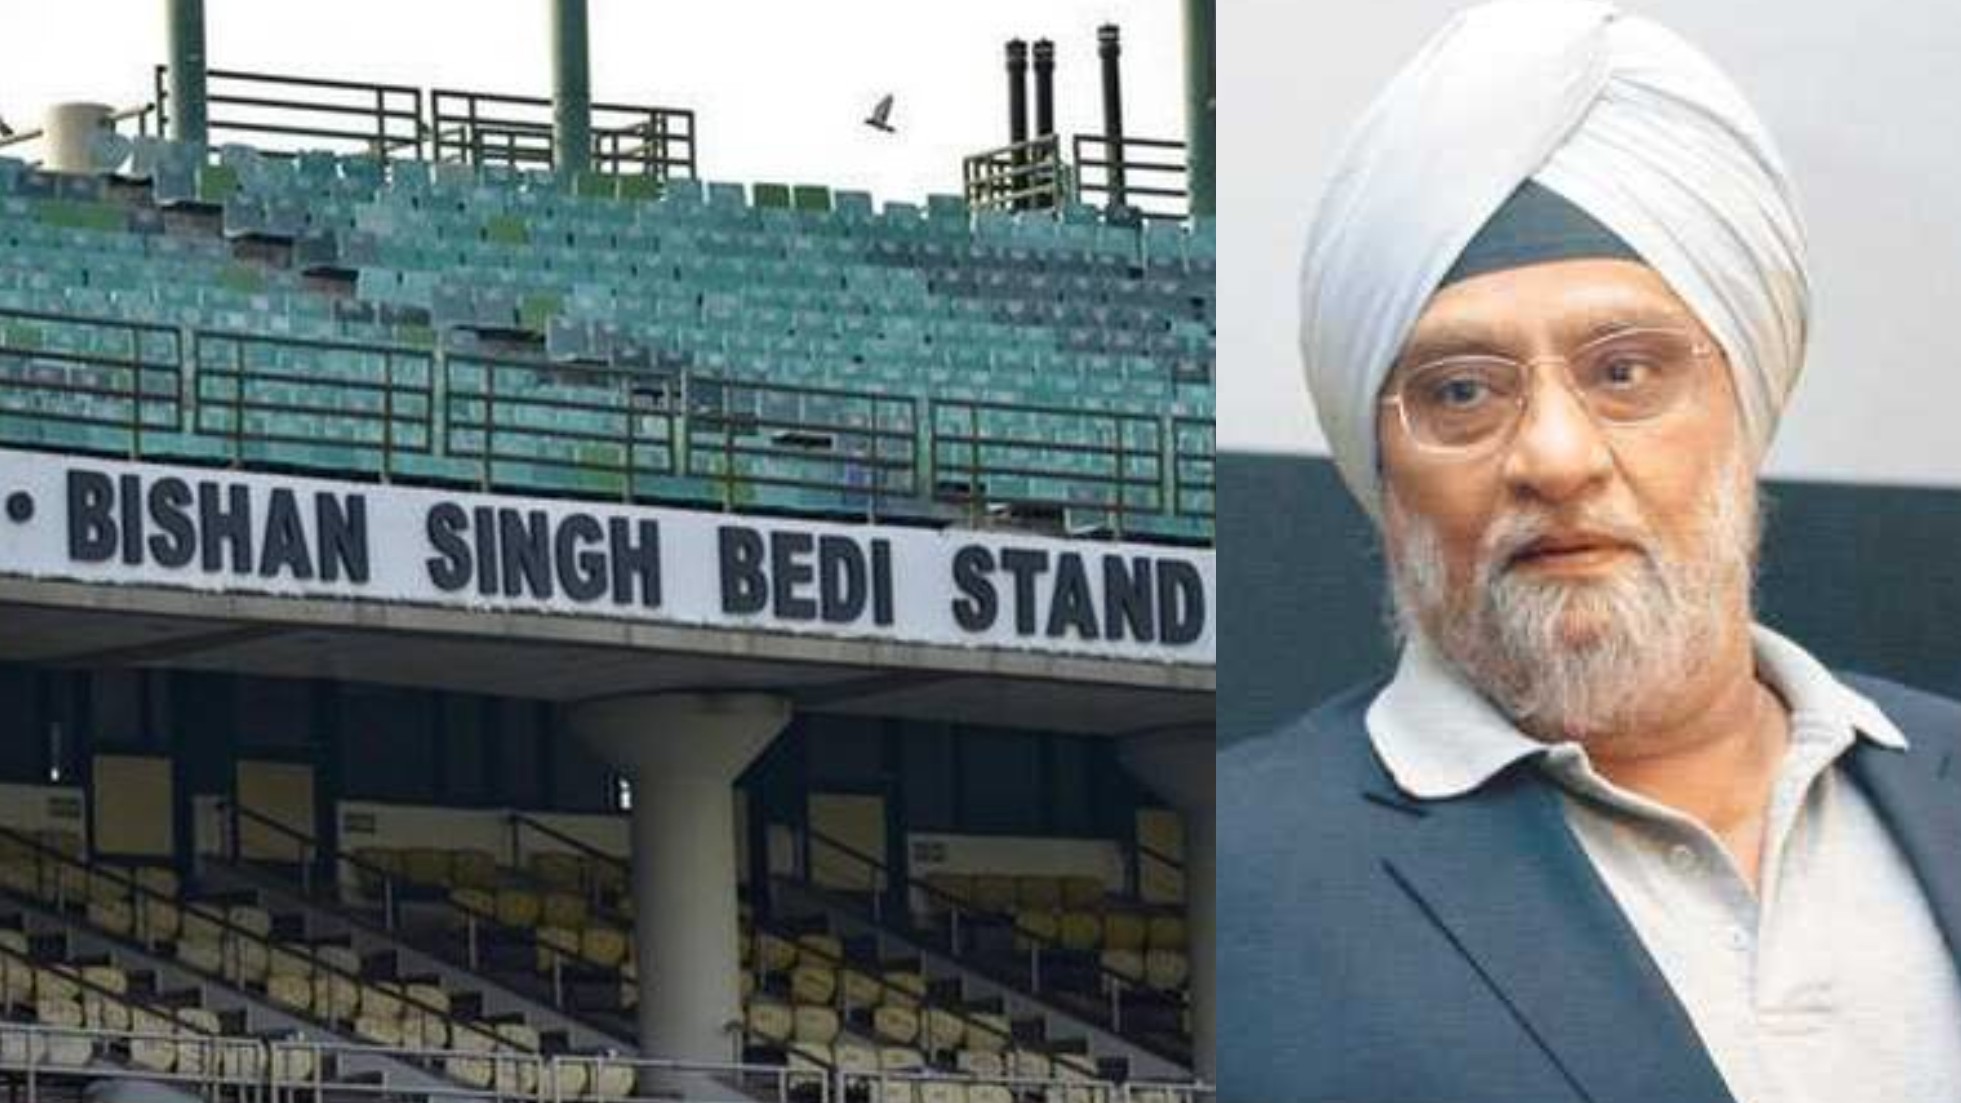 Angry with Jaitley’s statue, Bishan Singh Bedi asks DDCA to remove his name from Kotla stand